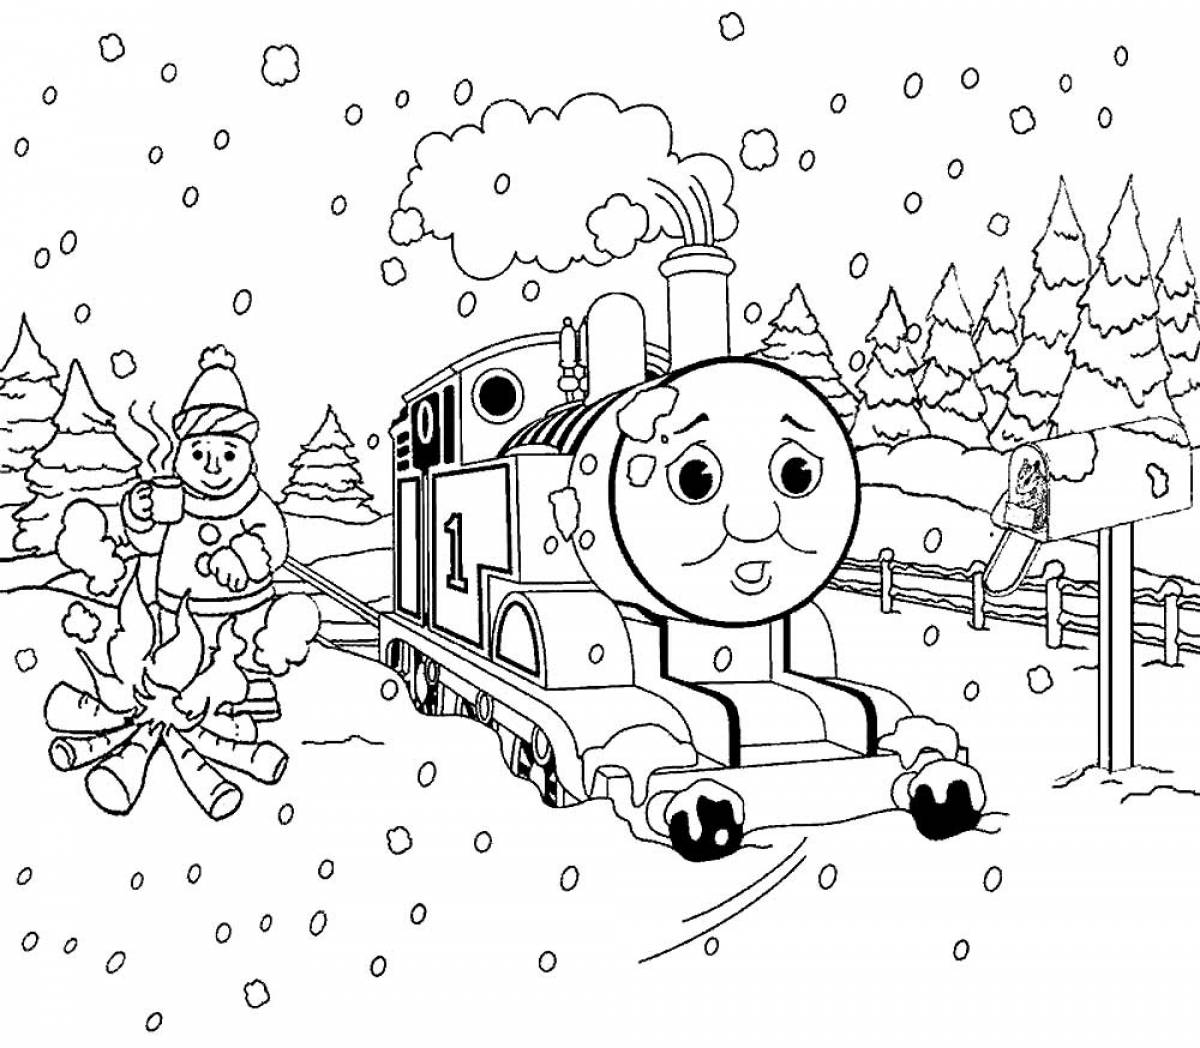 Thomas the engine in the snow